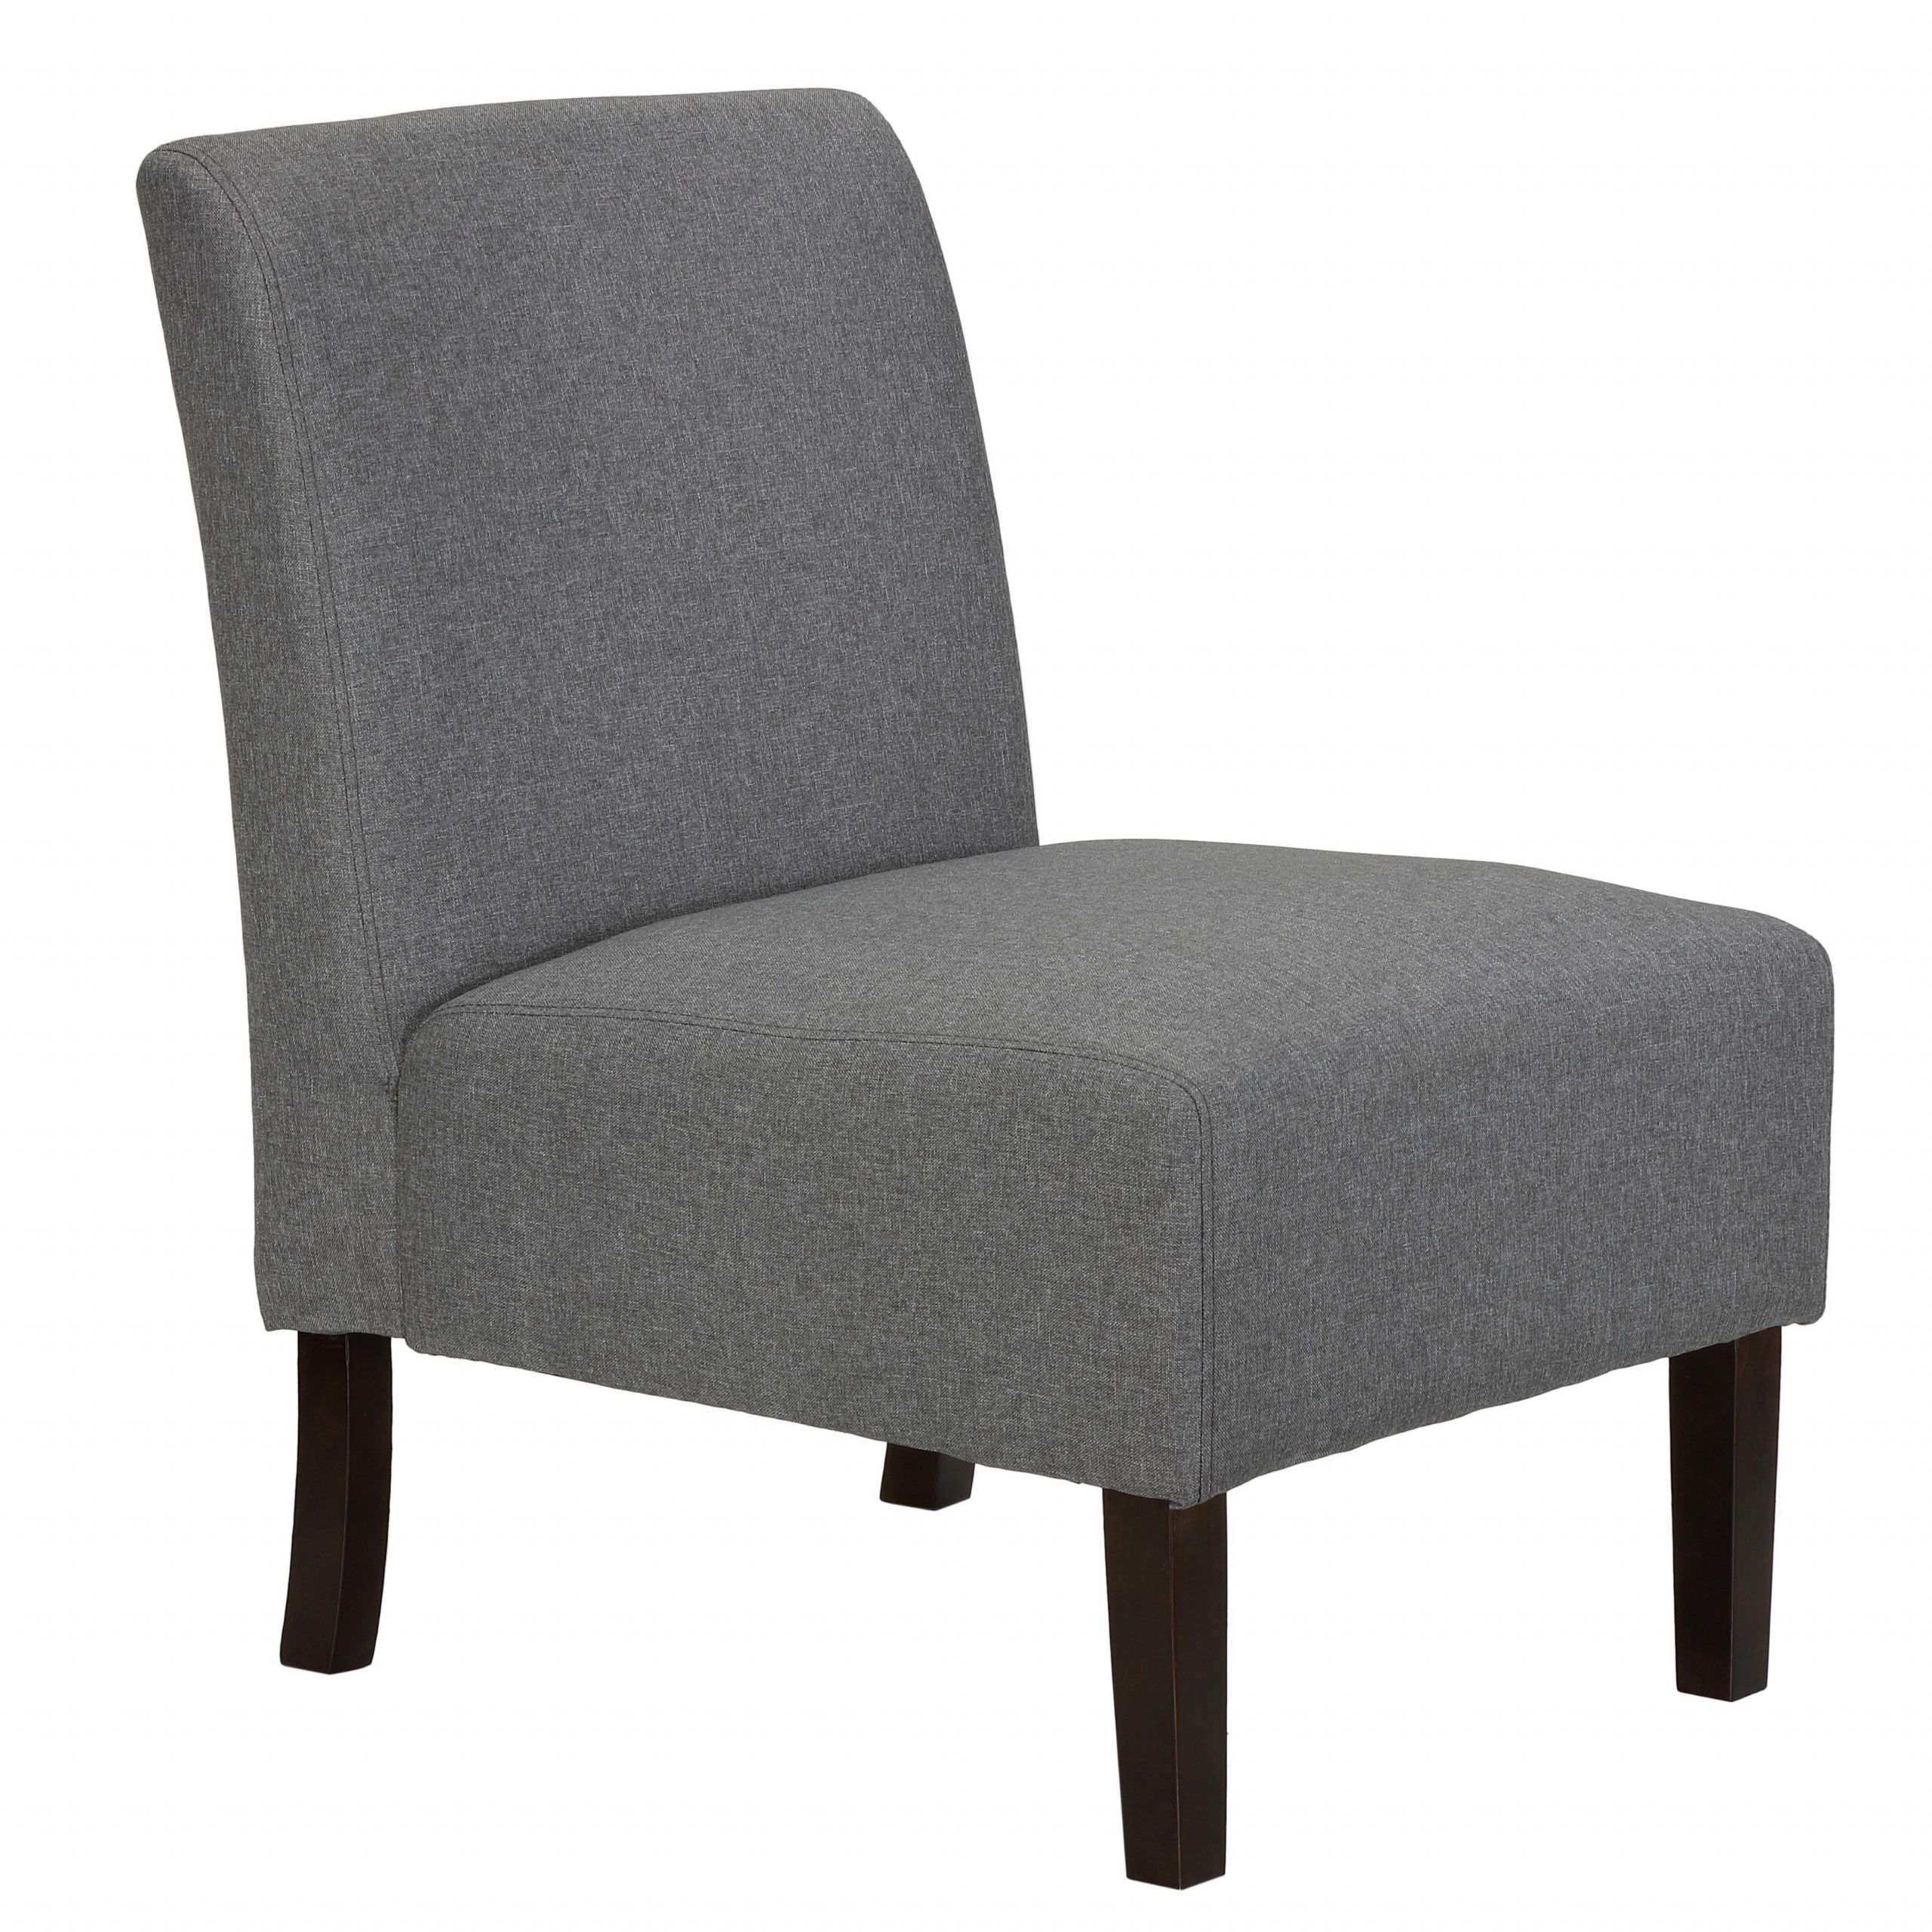 Gray Chenille Fabric Accent Stools Pertaining To 2017 Cortesi Home Chicco Grey Wood/fabric/linen Armless Accent Chair (View 9 of 10)